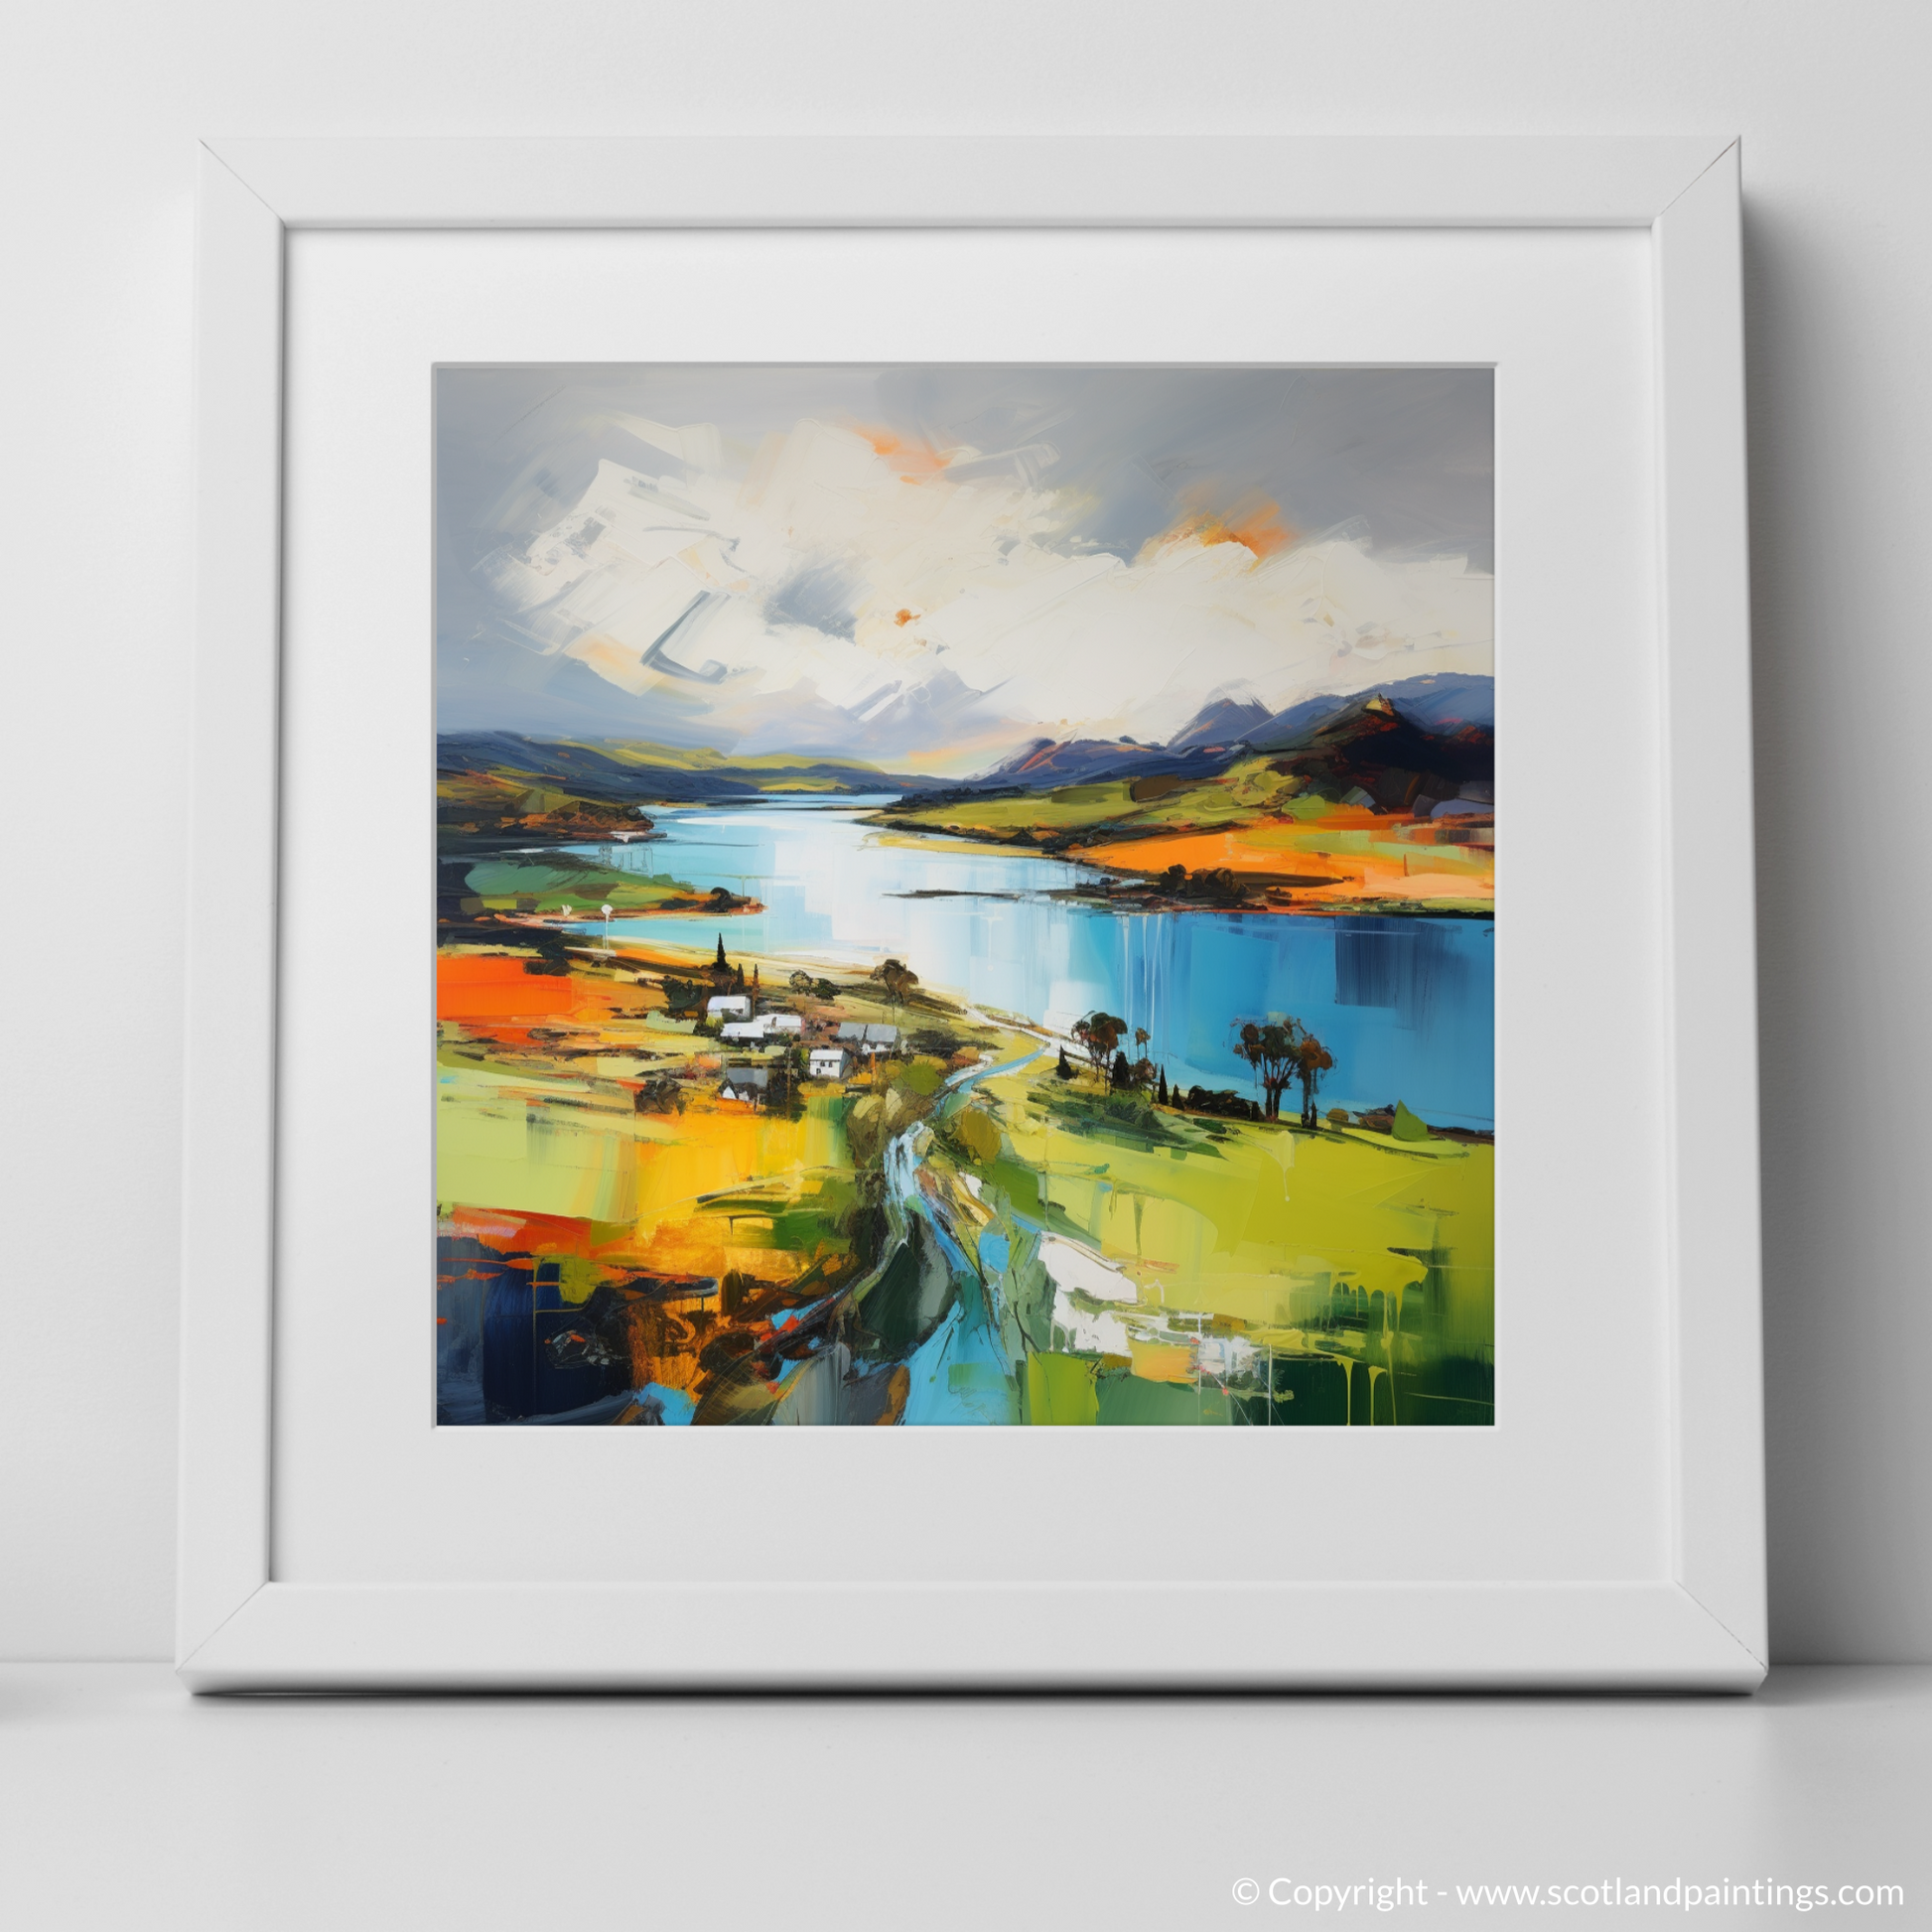 Art Print of Loch Leven, Perth and Kinross with a white frame